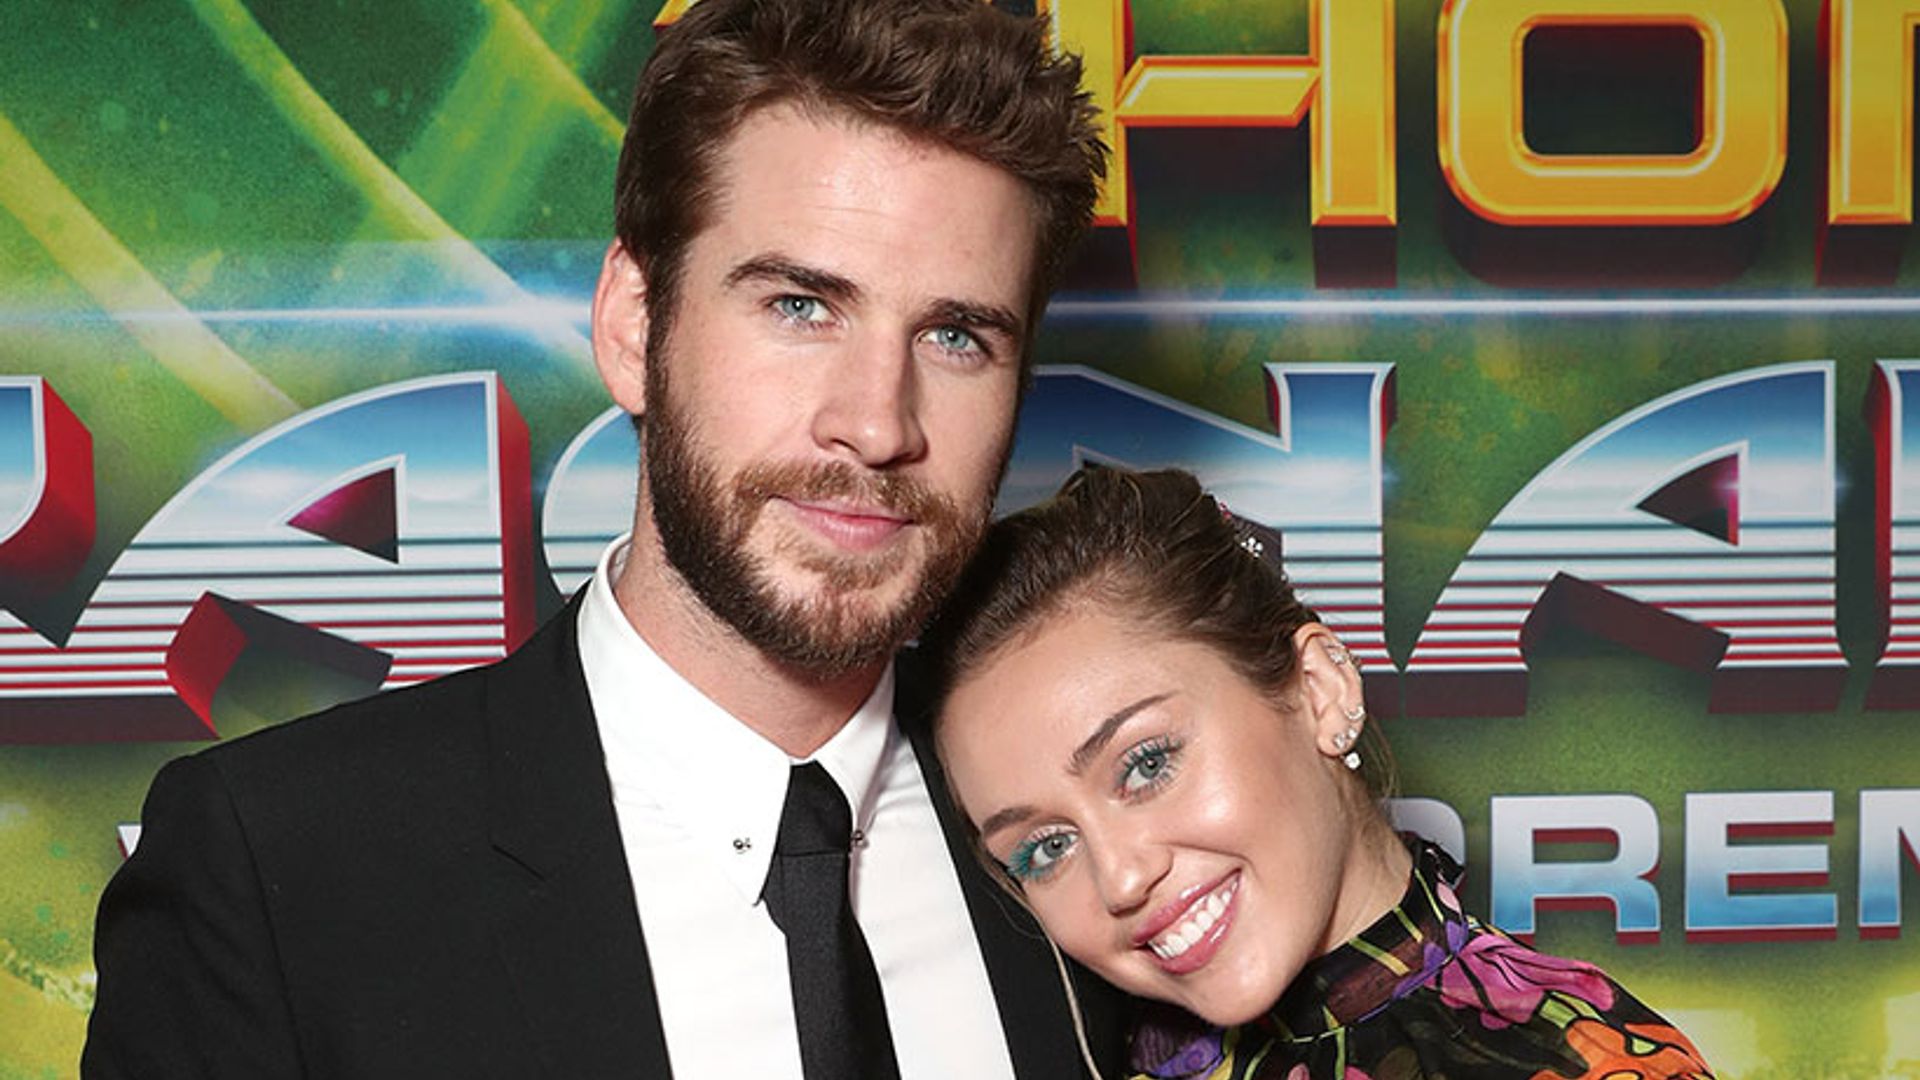 Miley Cyrus and Liam Hemsworth cosy up together as they make rare red carpet appearance at Thor: Ragnarok premiere